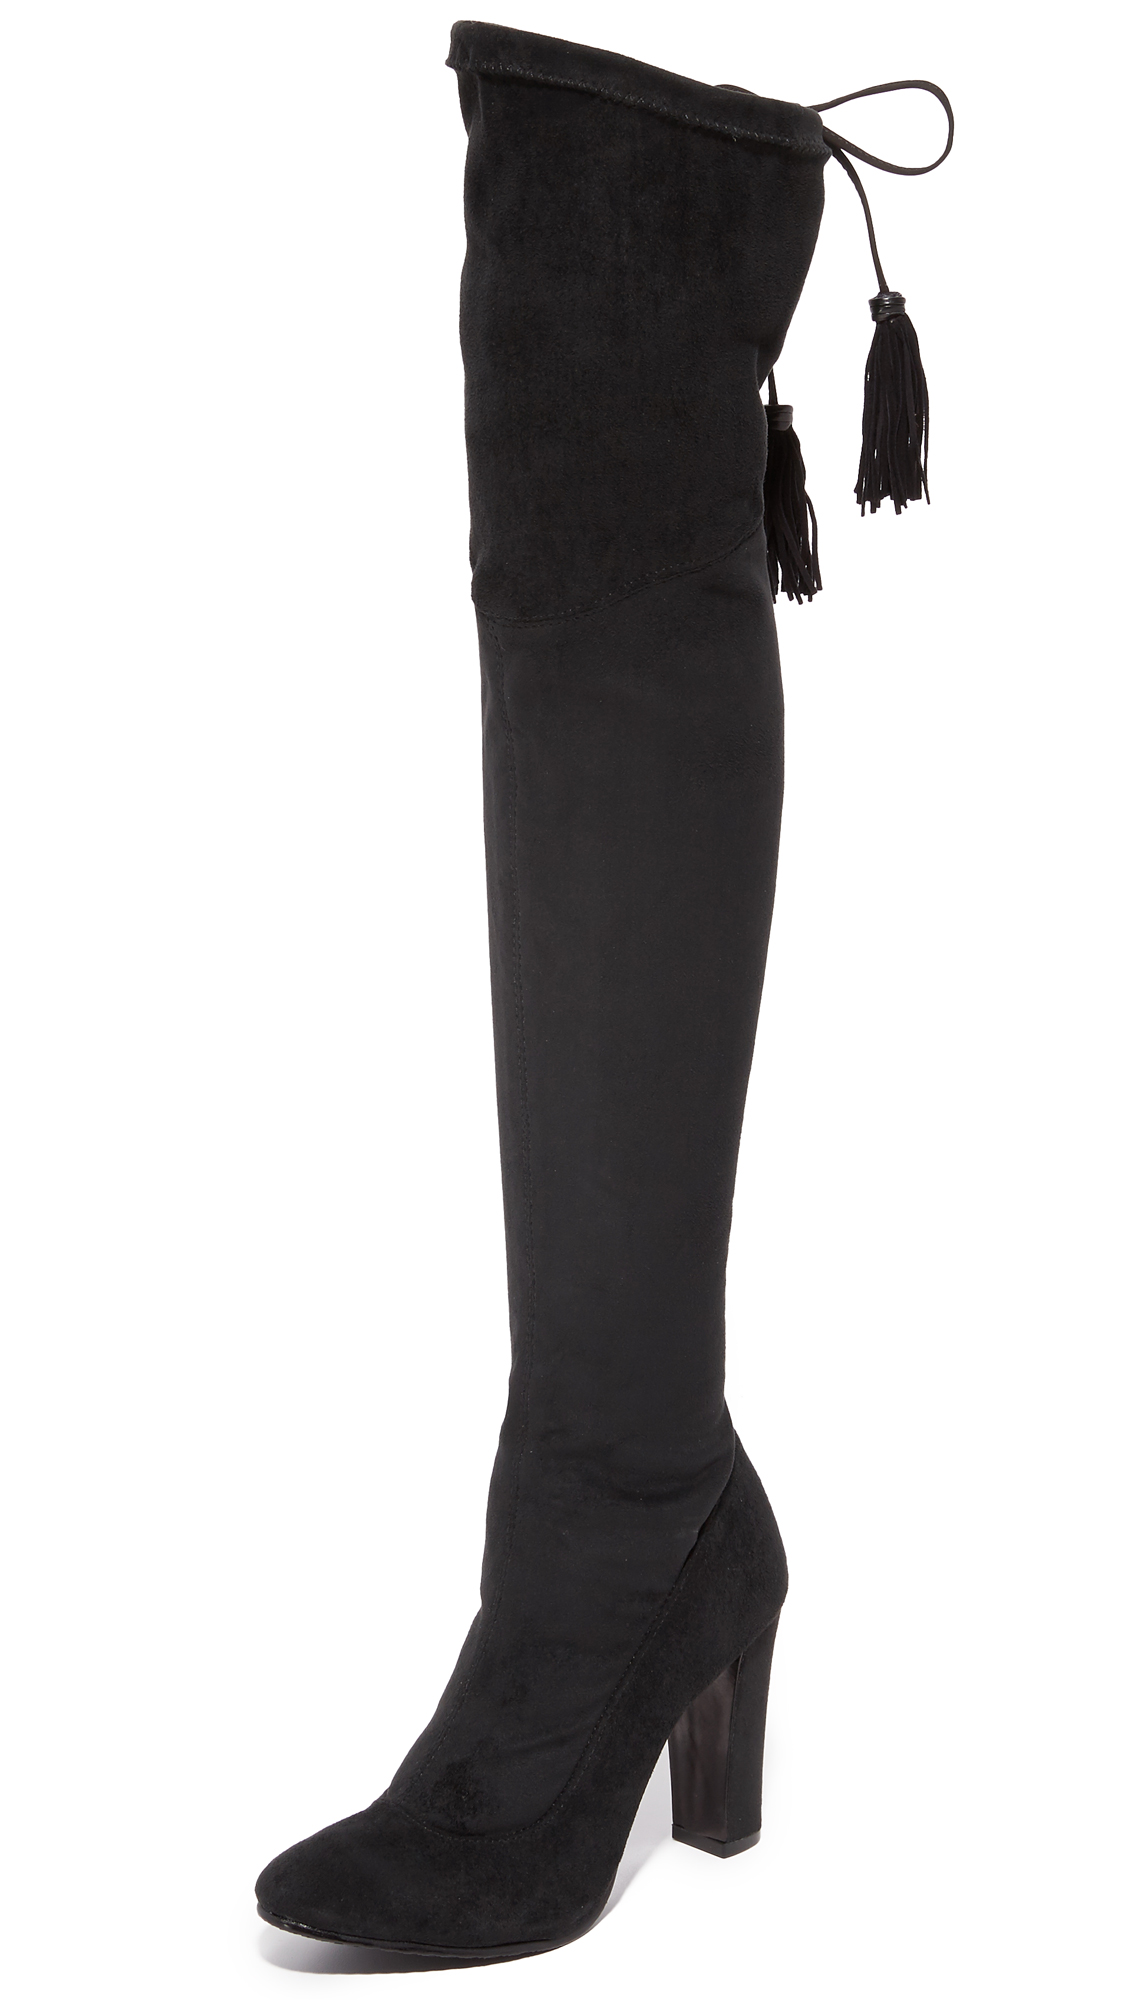 Beau Over the Knee Boots